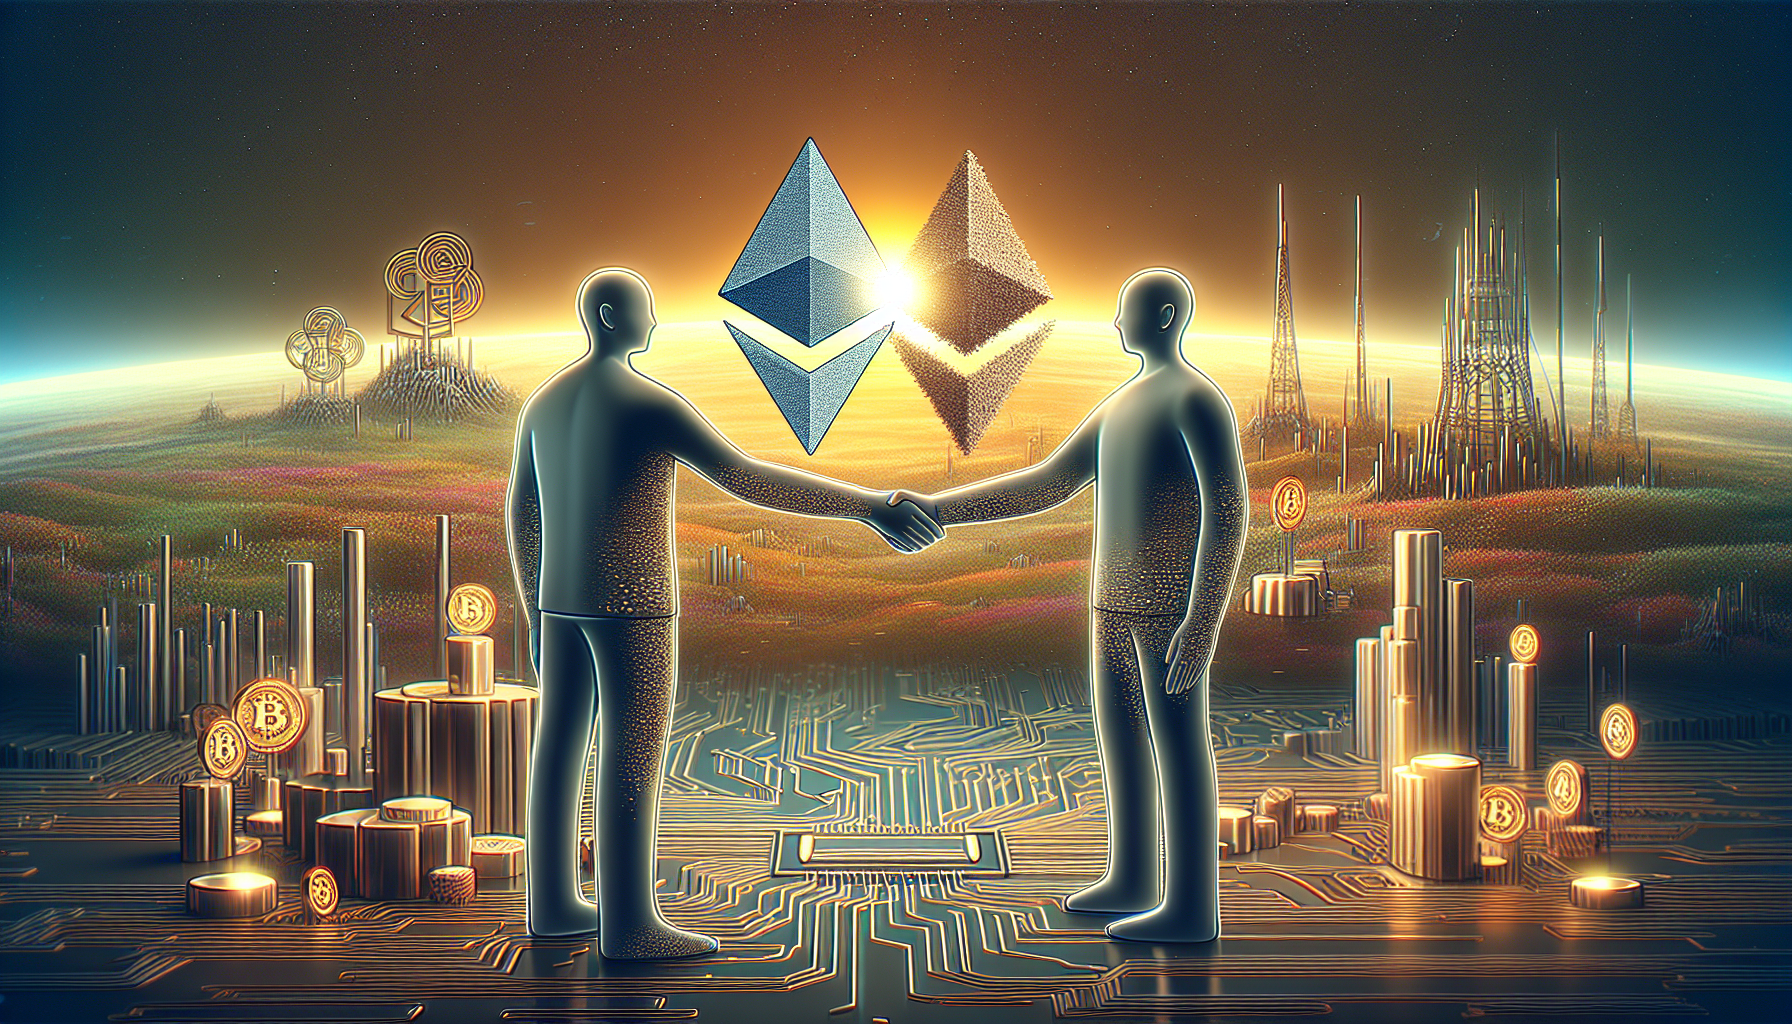 Illustration of Ethereum and SEC collaboration for innovation